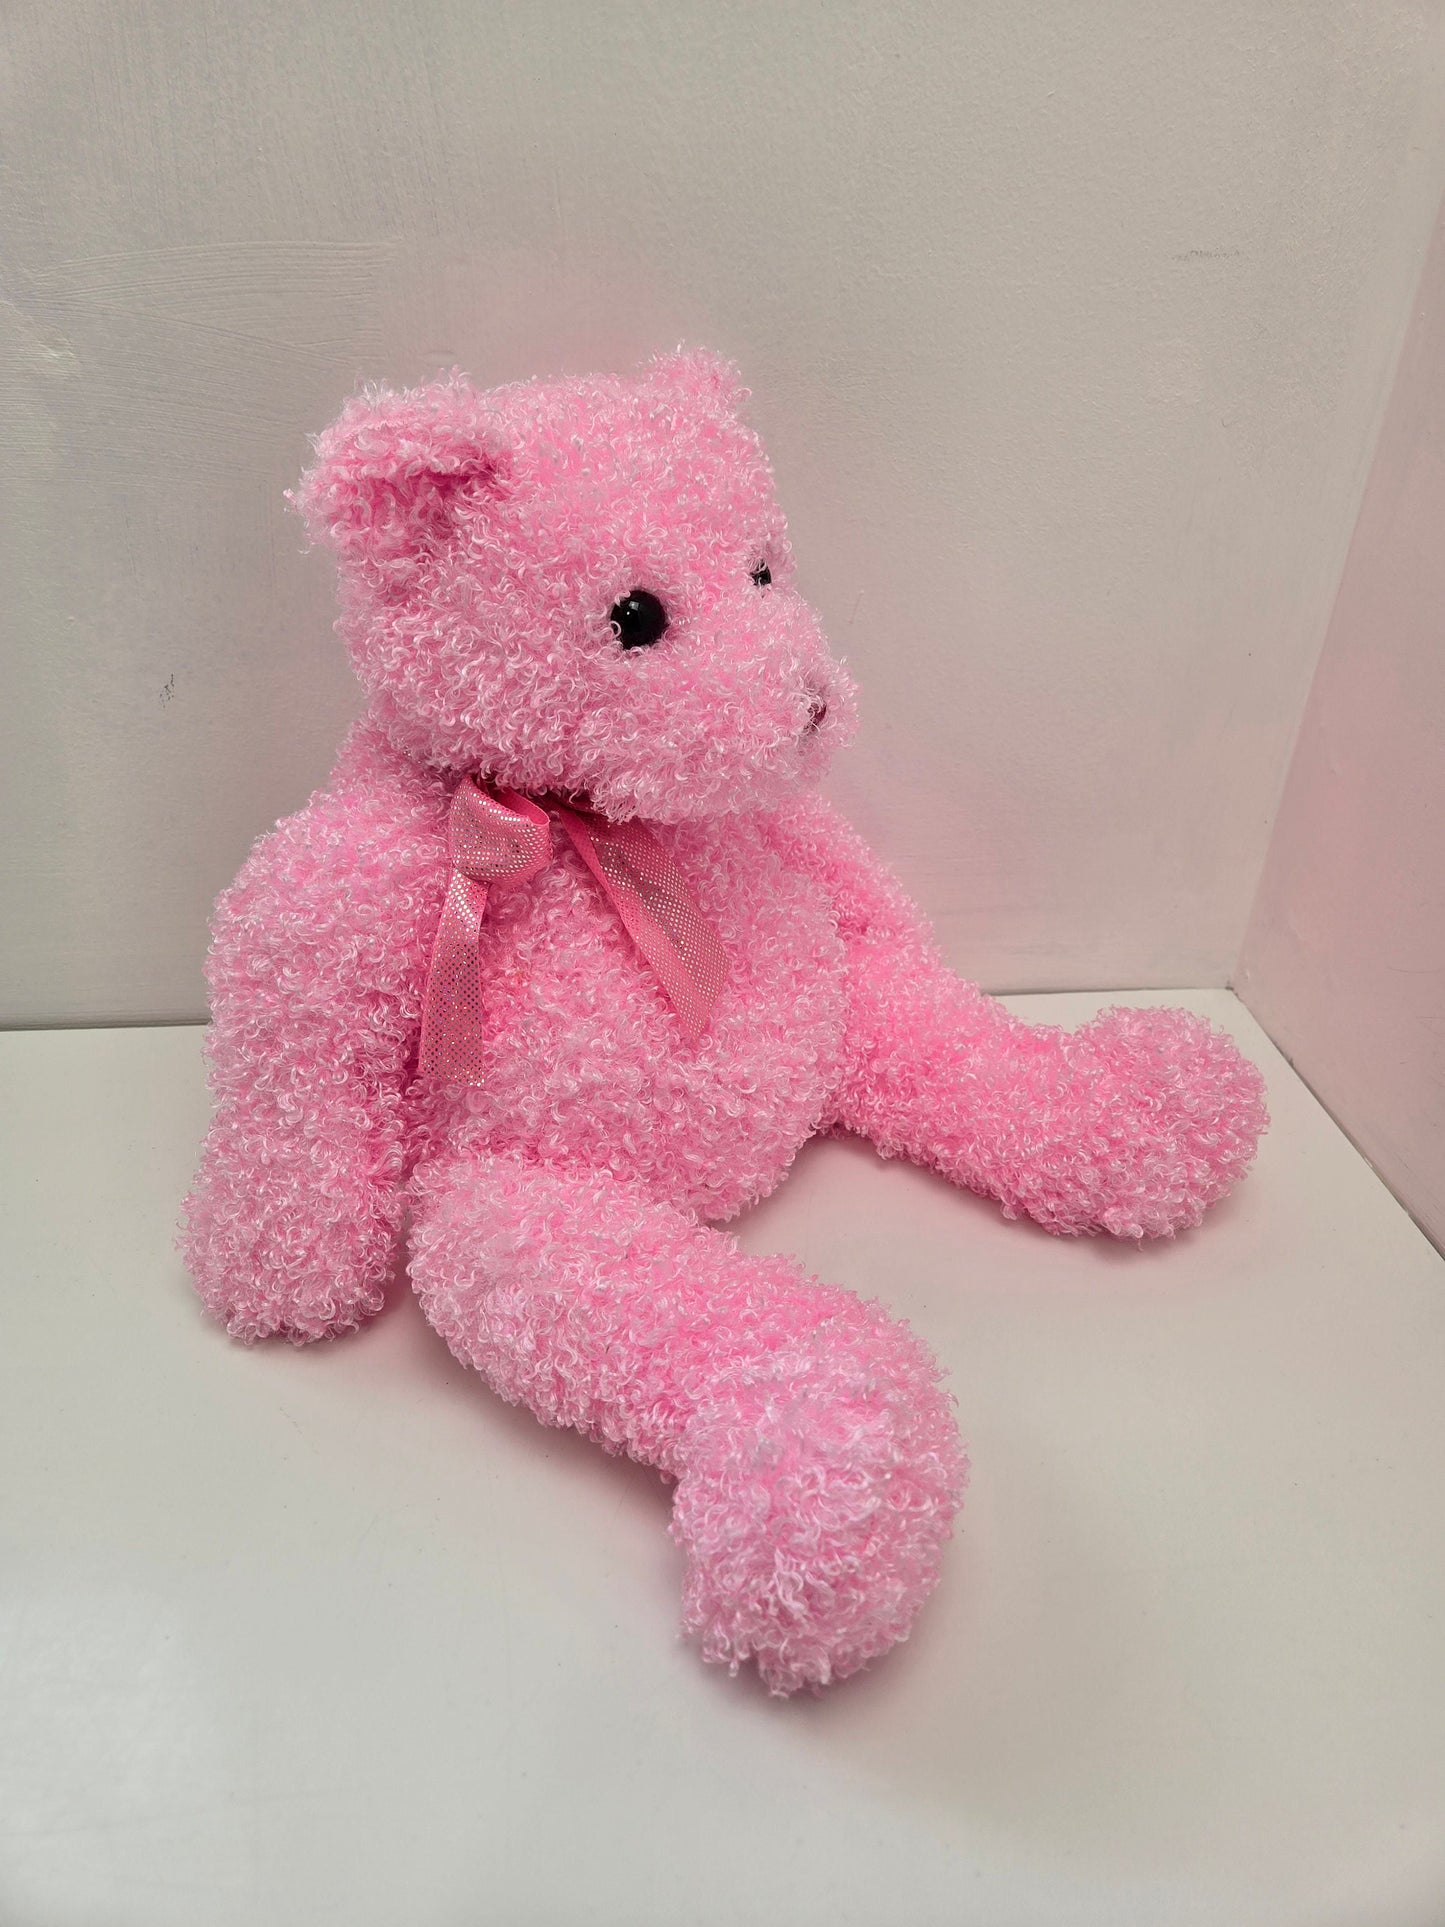 TY Pinkys Collection “Shimmers” the Large Pink Bear (15 inch)